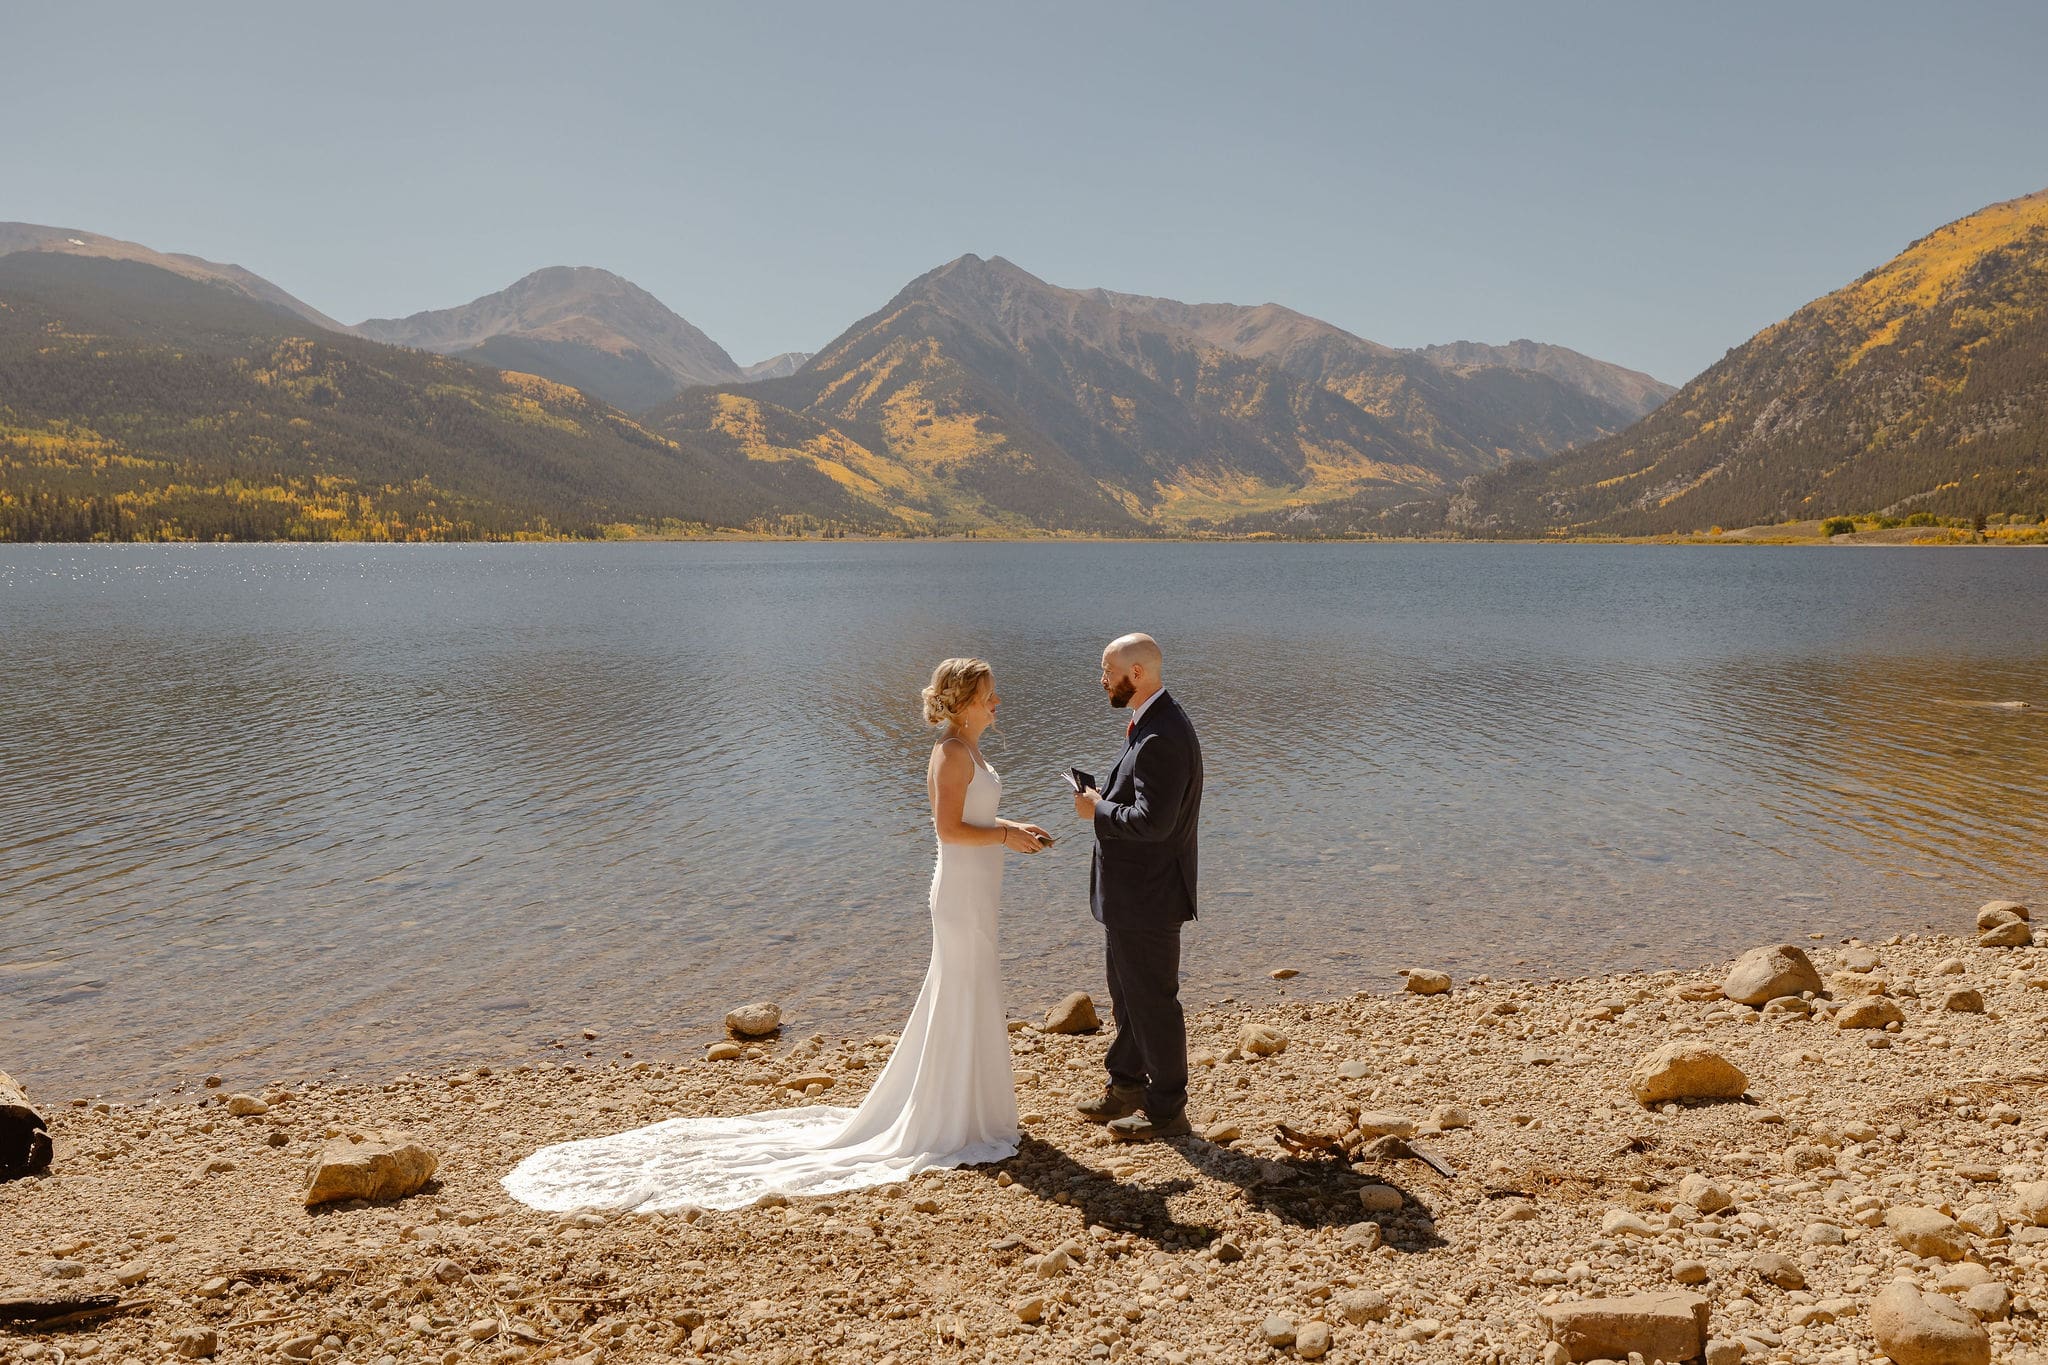 a couple wearing wedding attire standing at the lake shore of twin lakes, colorado